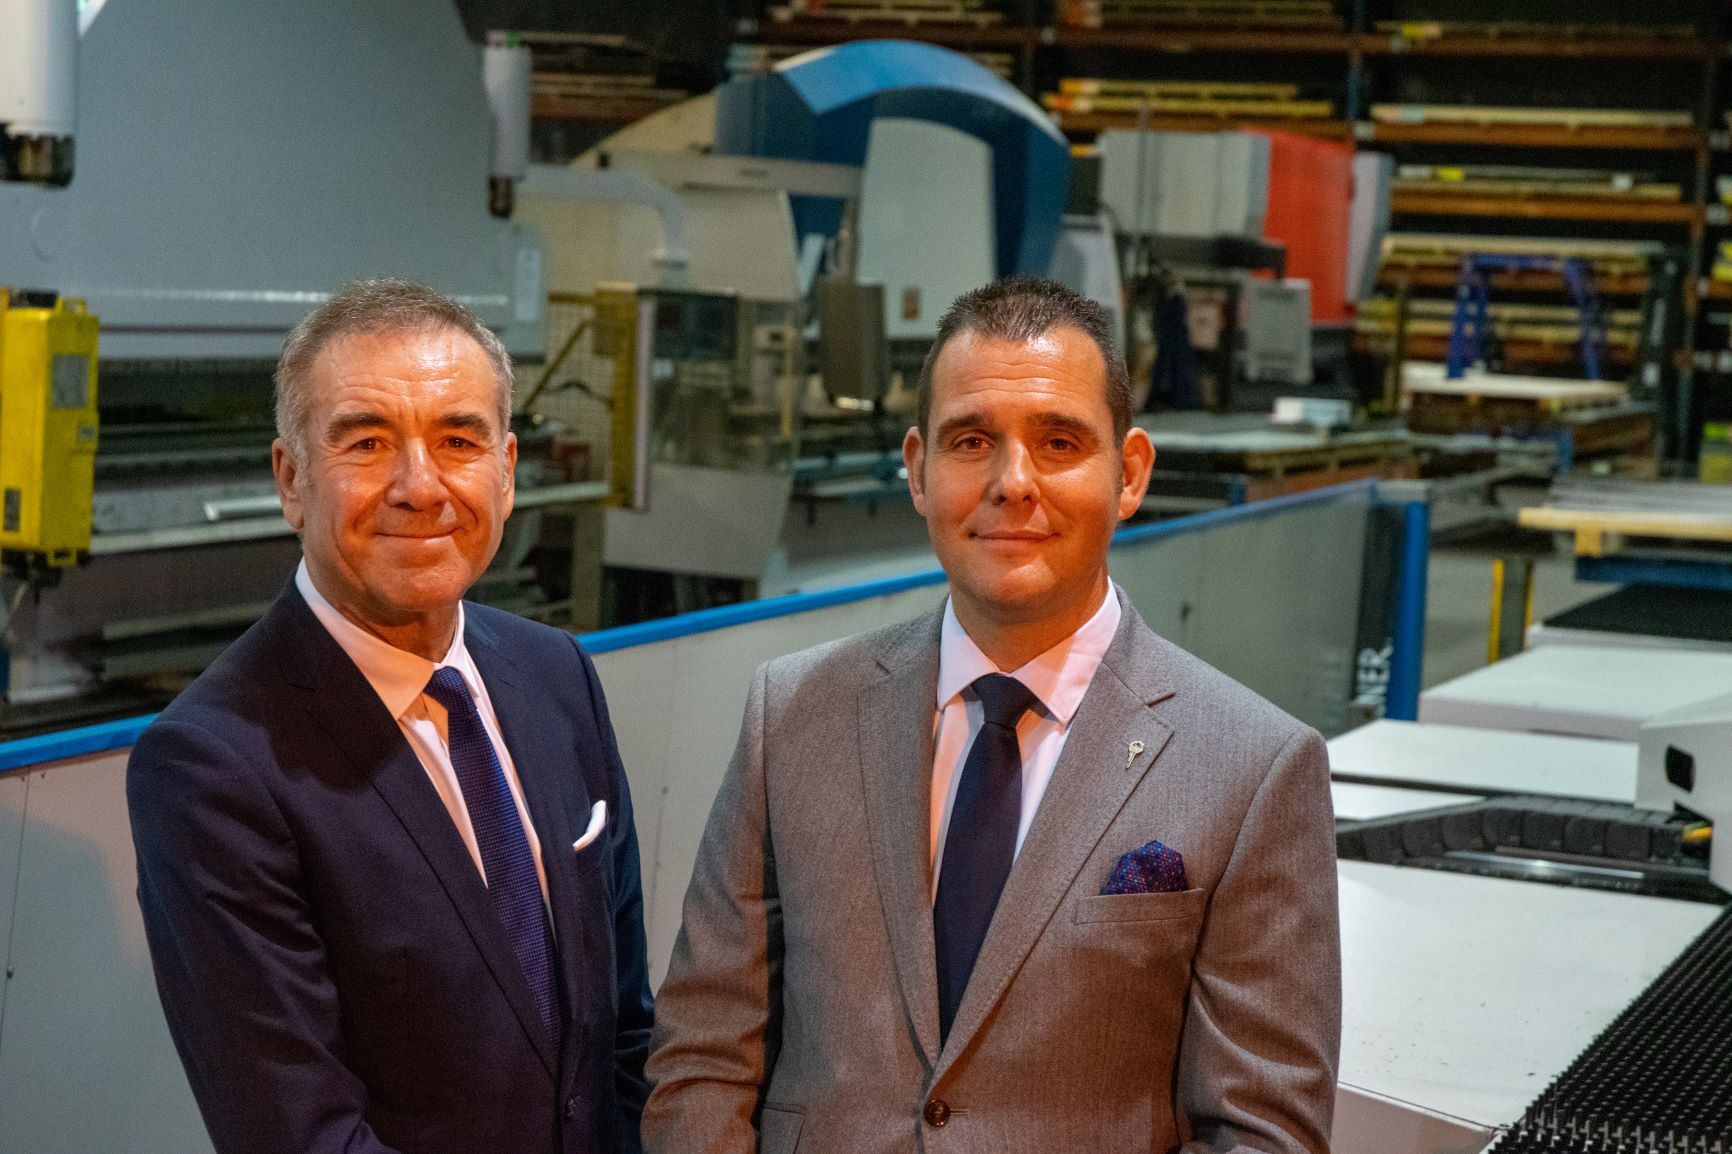 Scottish acquisition drives growth for cladding specialist Vivalda